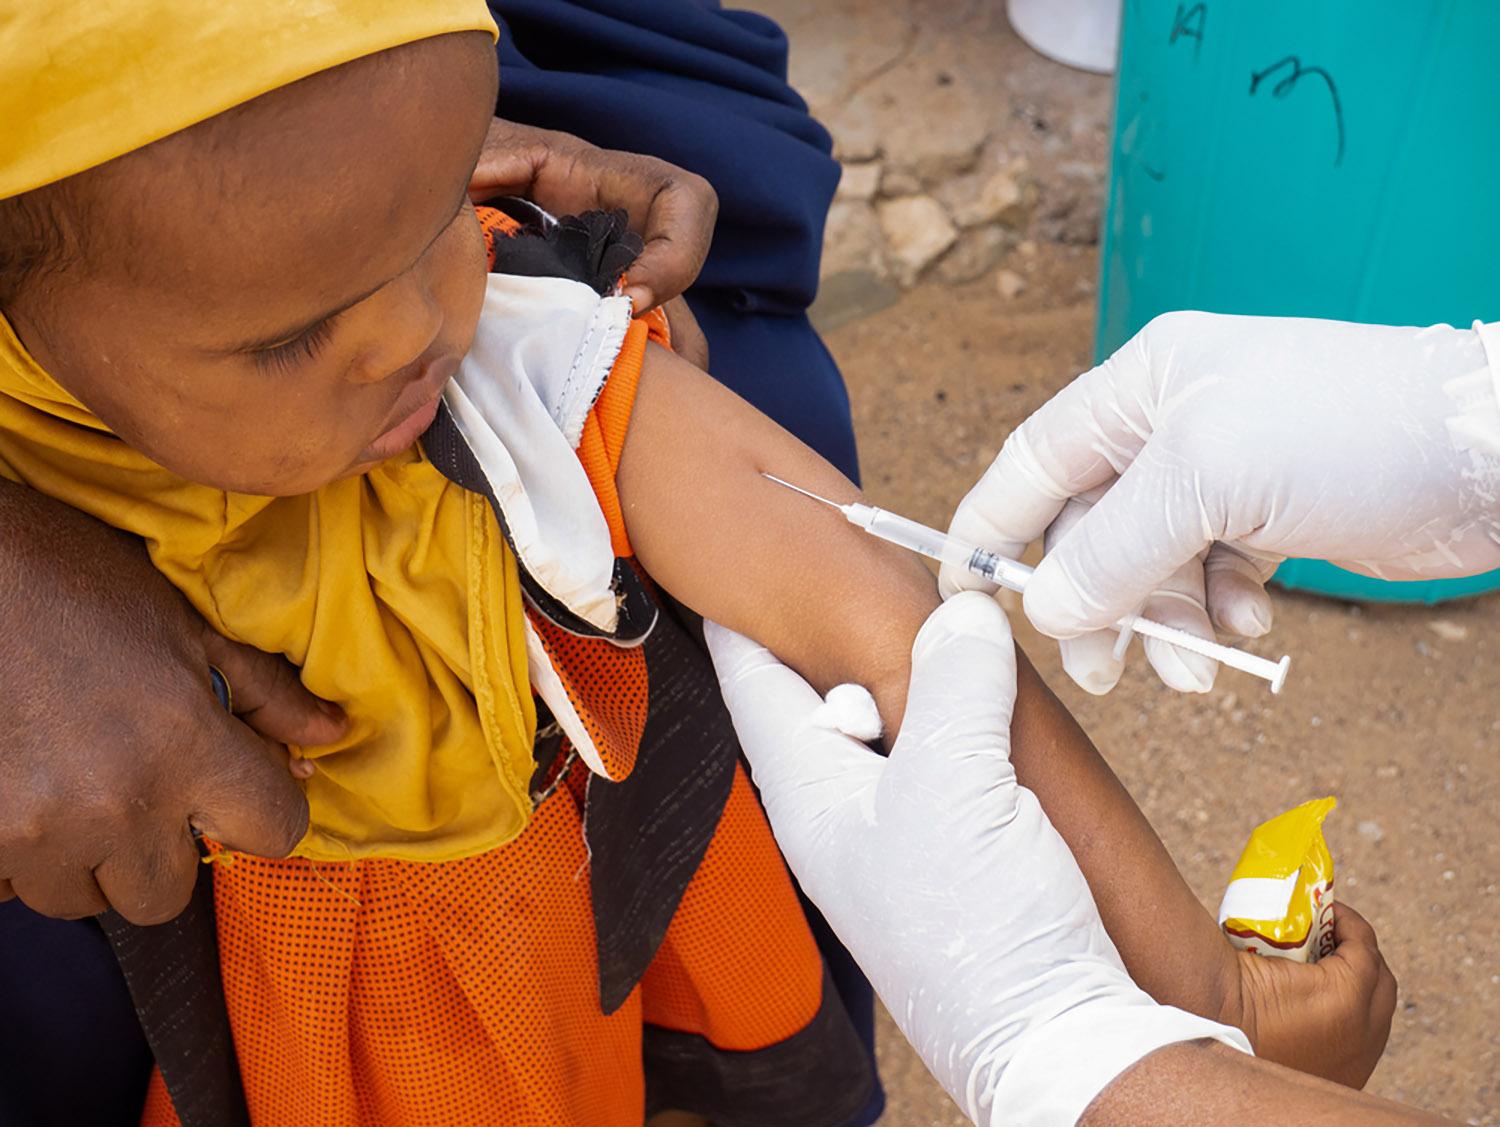 A young girl receiving measles vaccine in odweyne district, Somaliland.